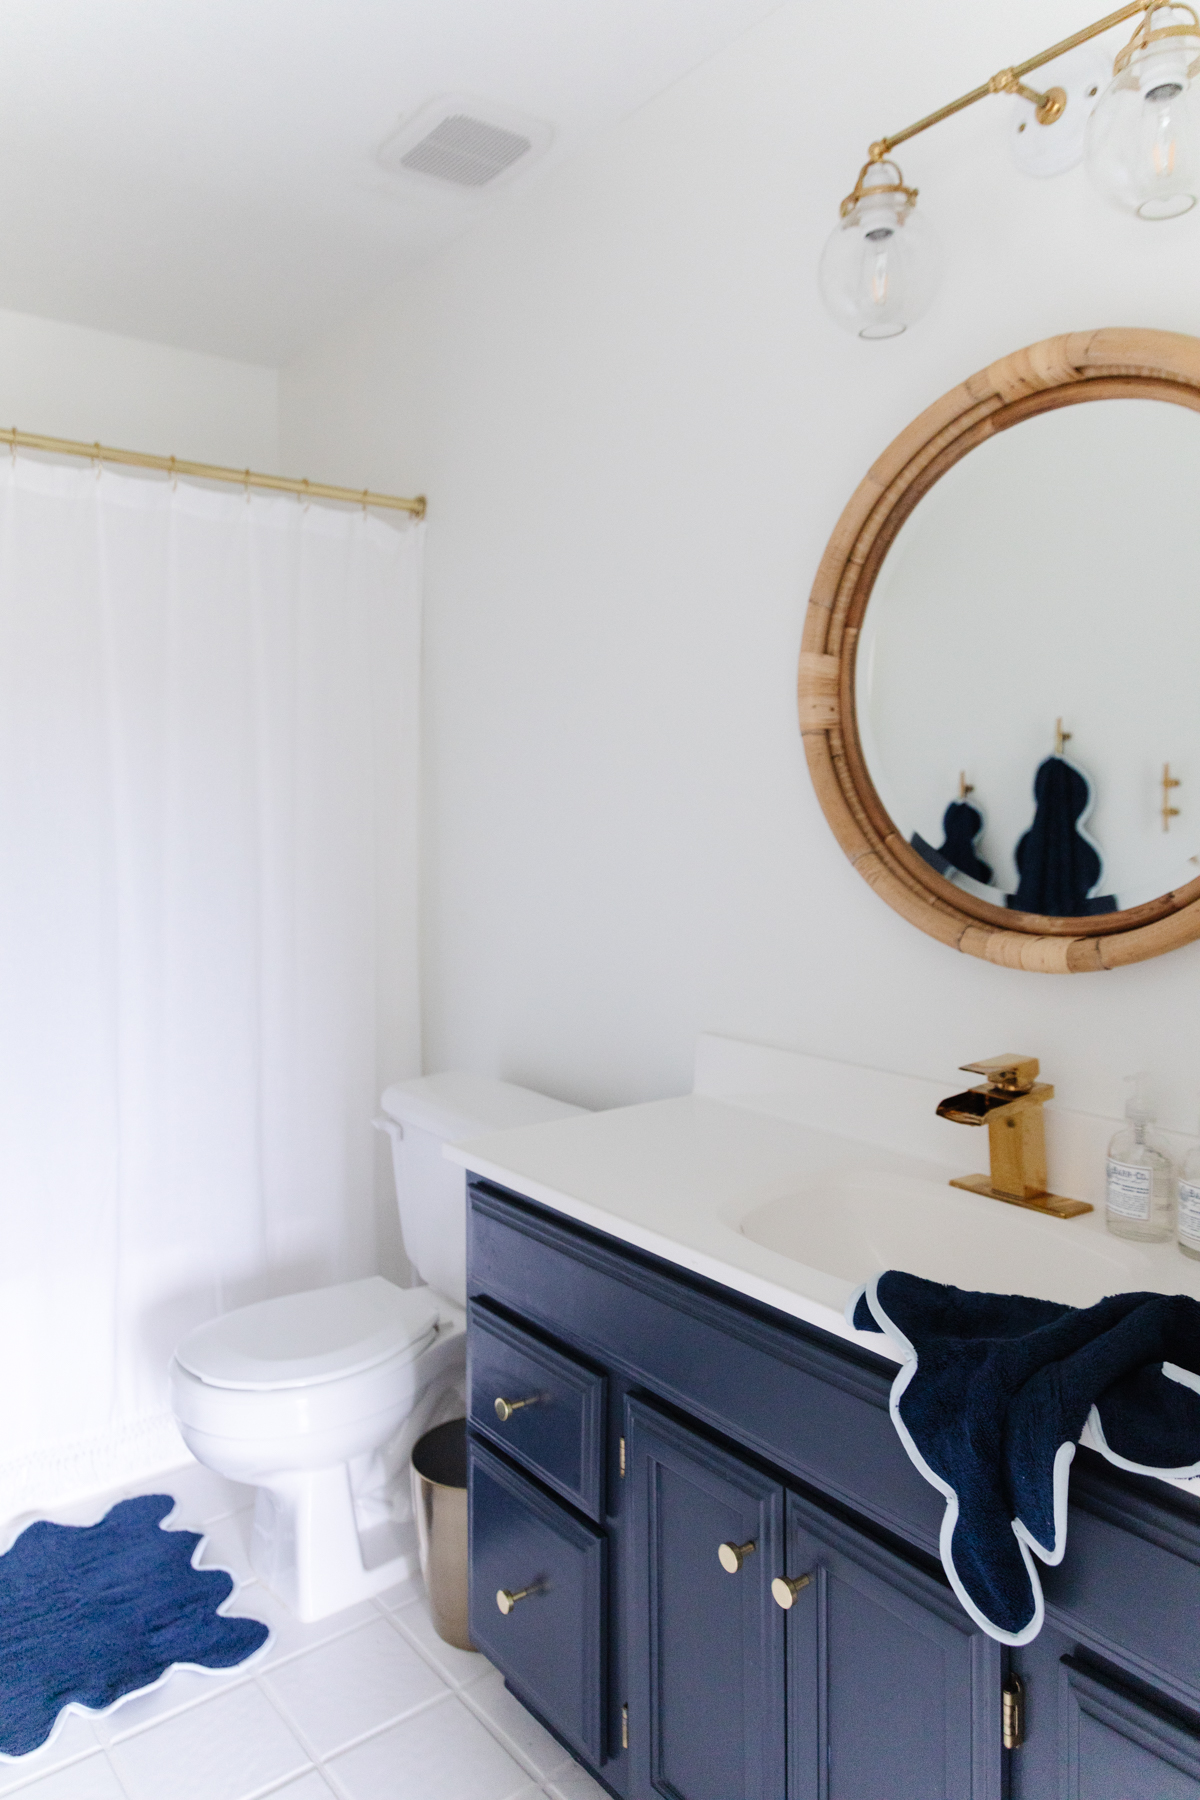 A nautical-themed bathroom with blue cabinets and a round mirror.